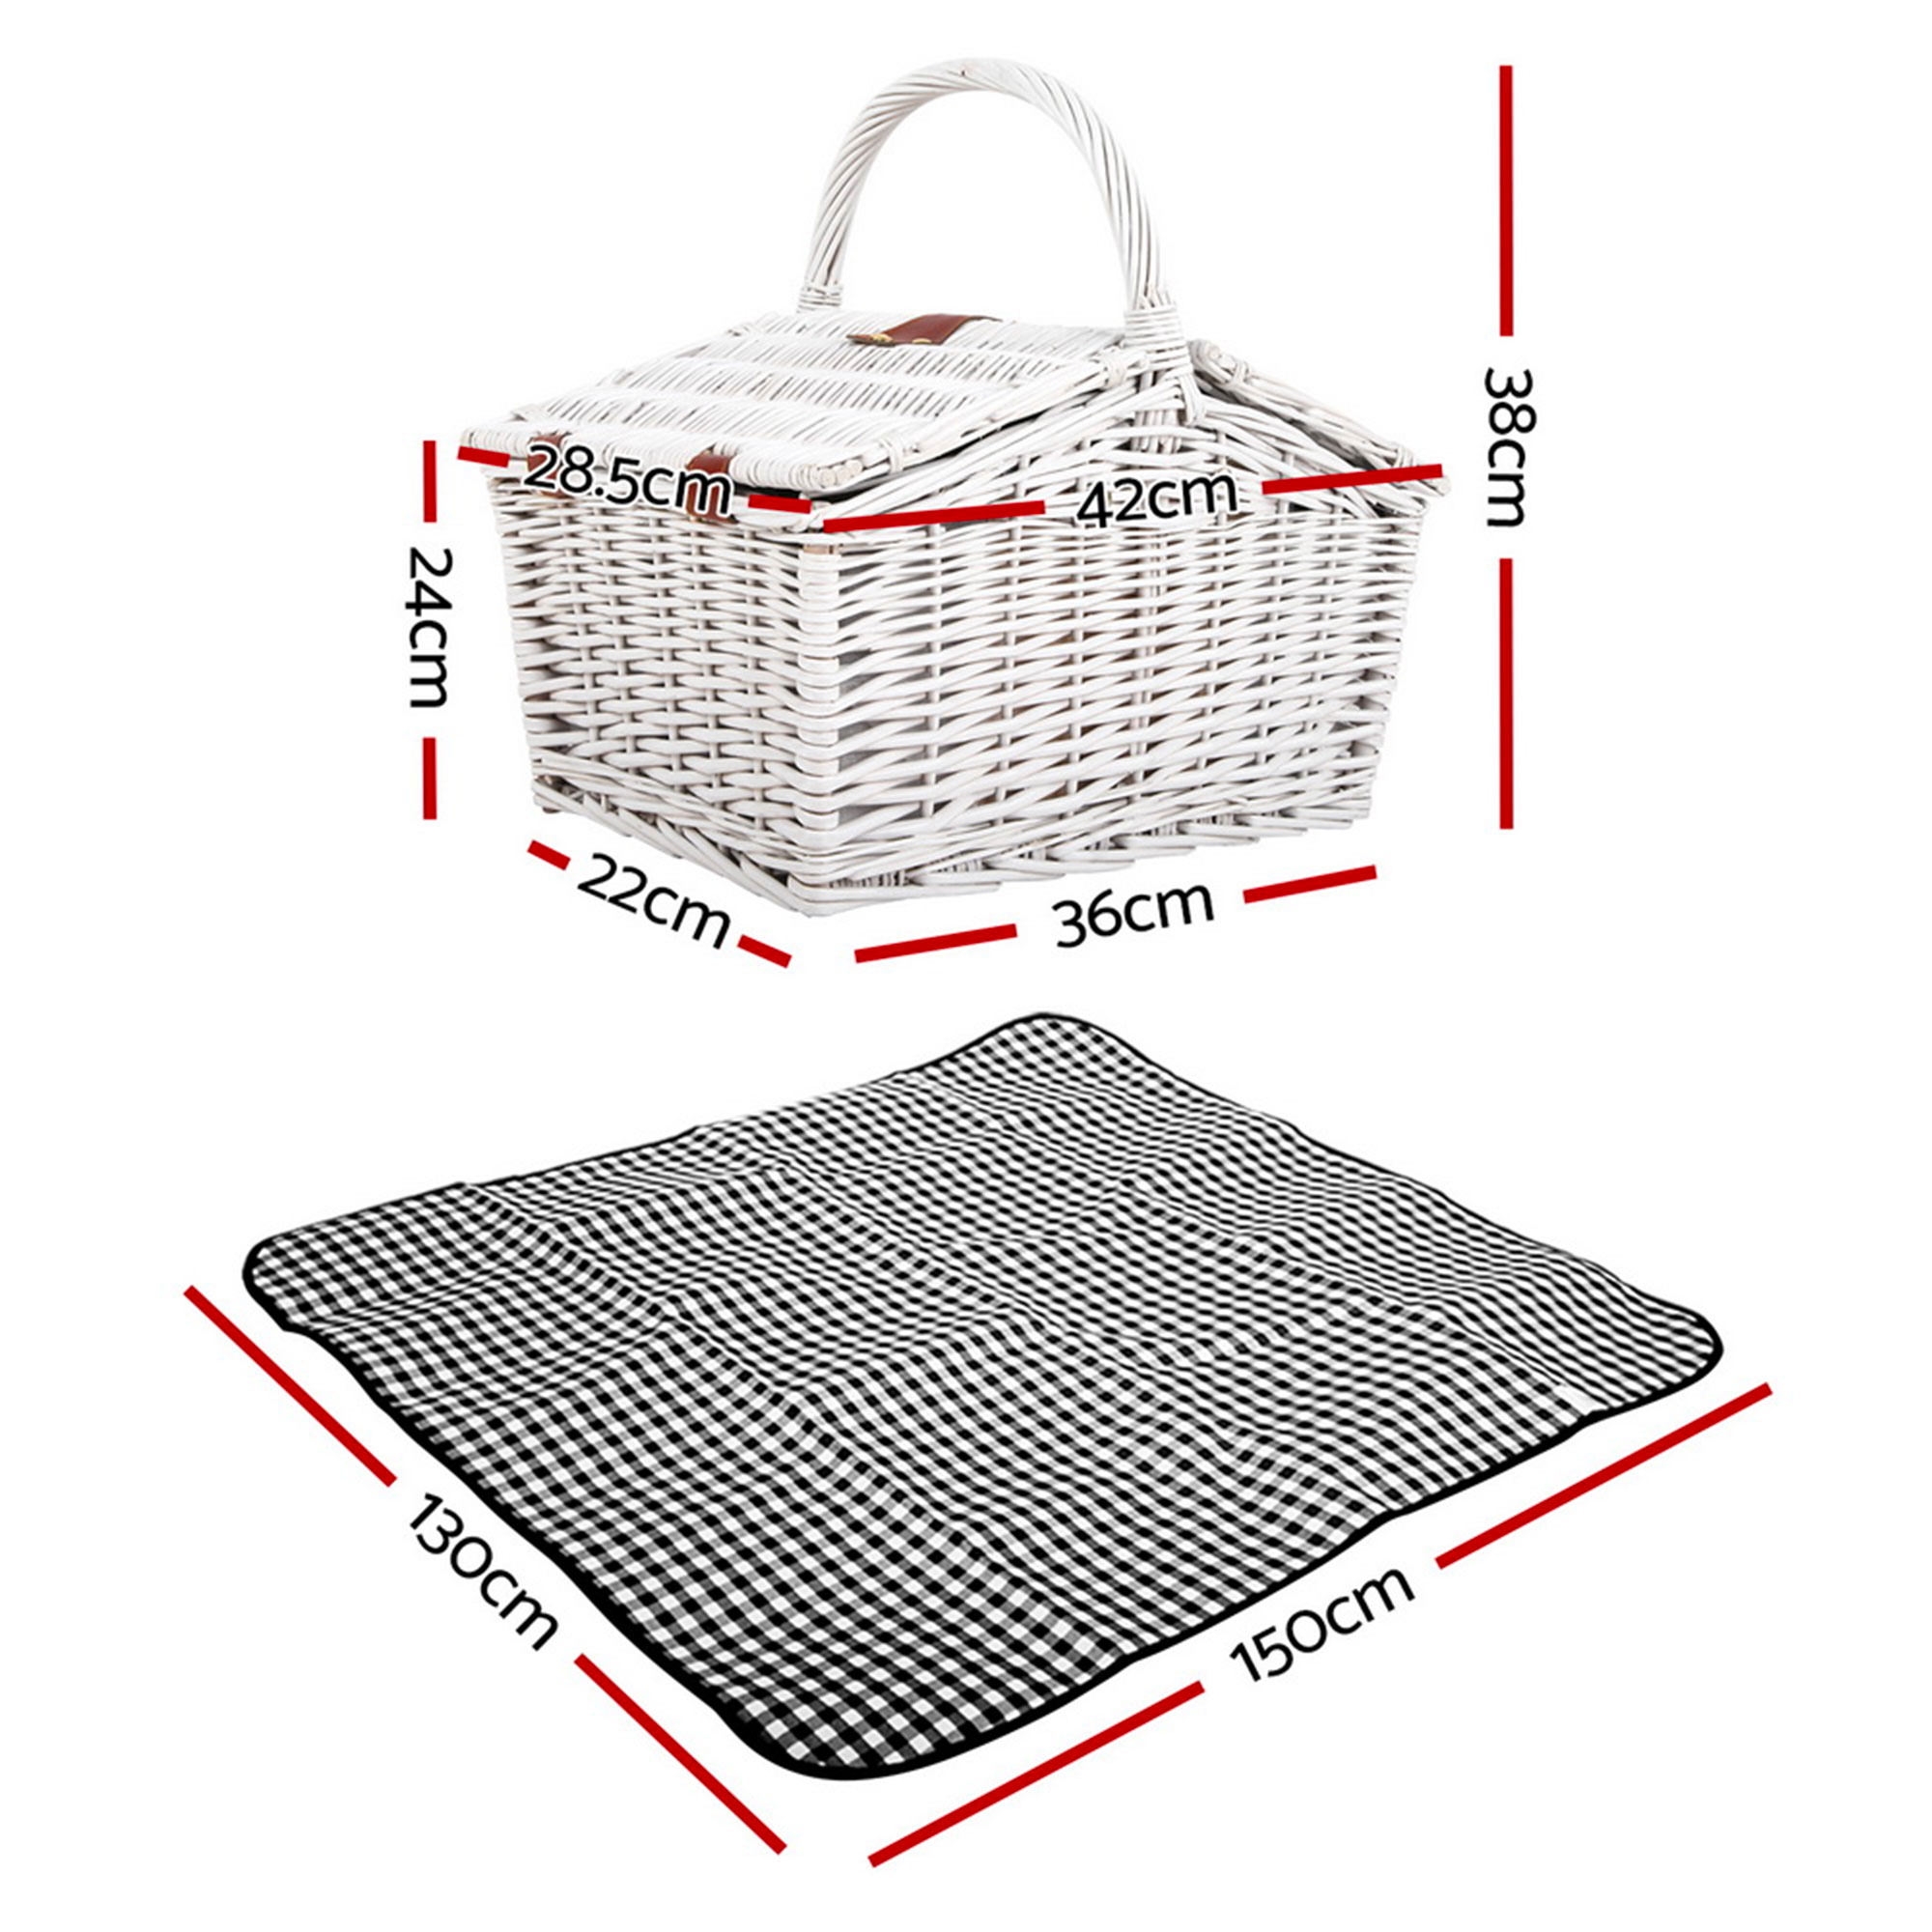 Alfresco 2 Person Deluxe Picnic Basket with Black/White Check Blanket Image 2